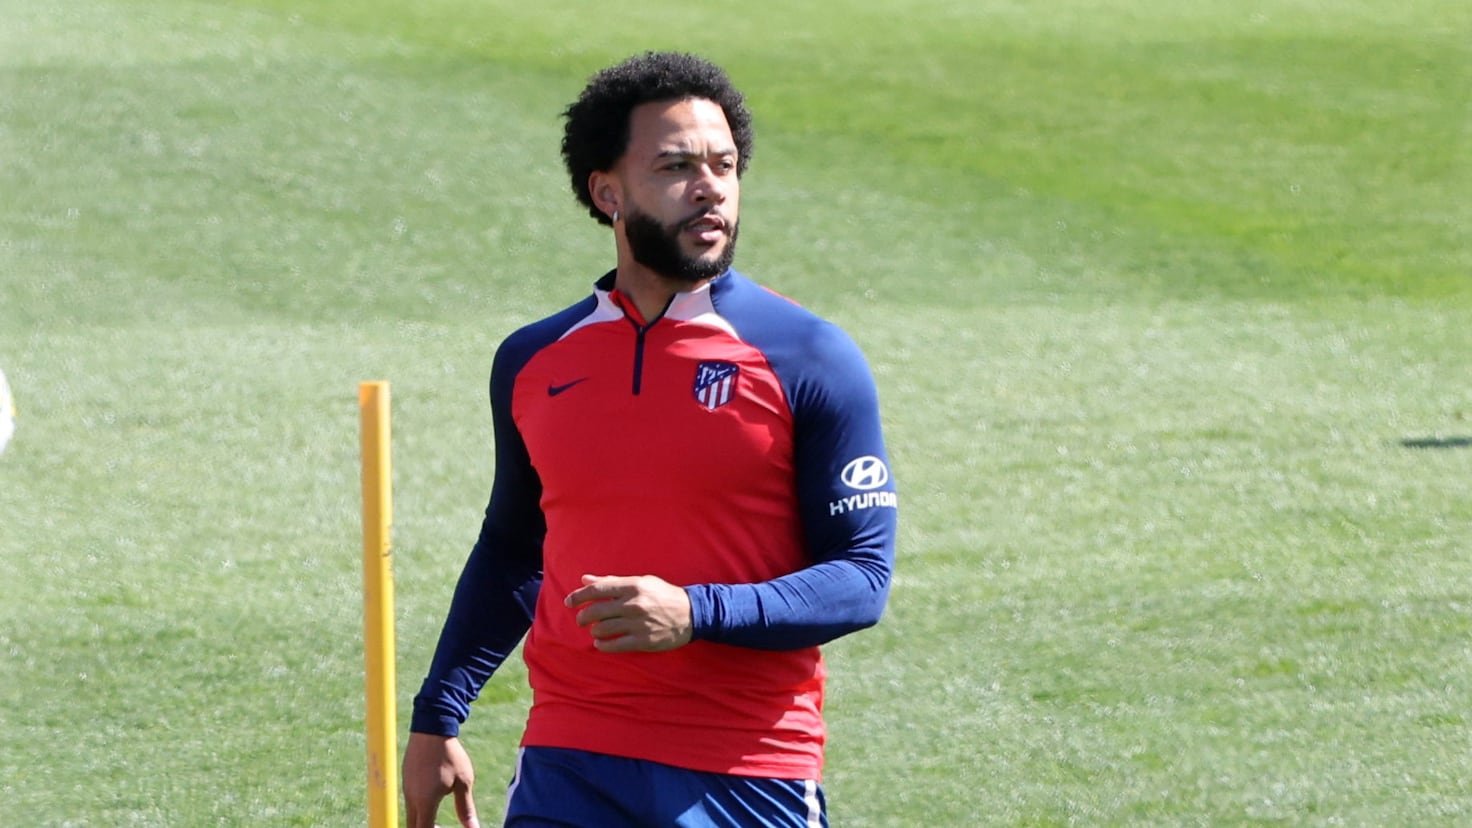 Memphis' Comeback to Atleti Shadowed by Injury Woes and Uncertain Future